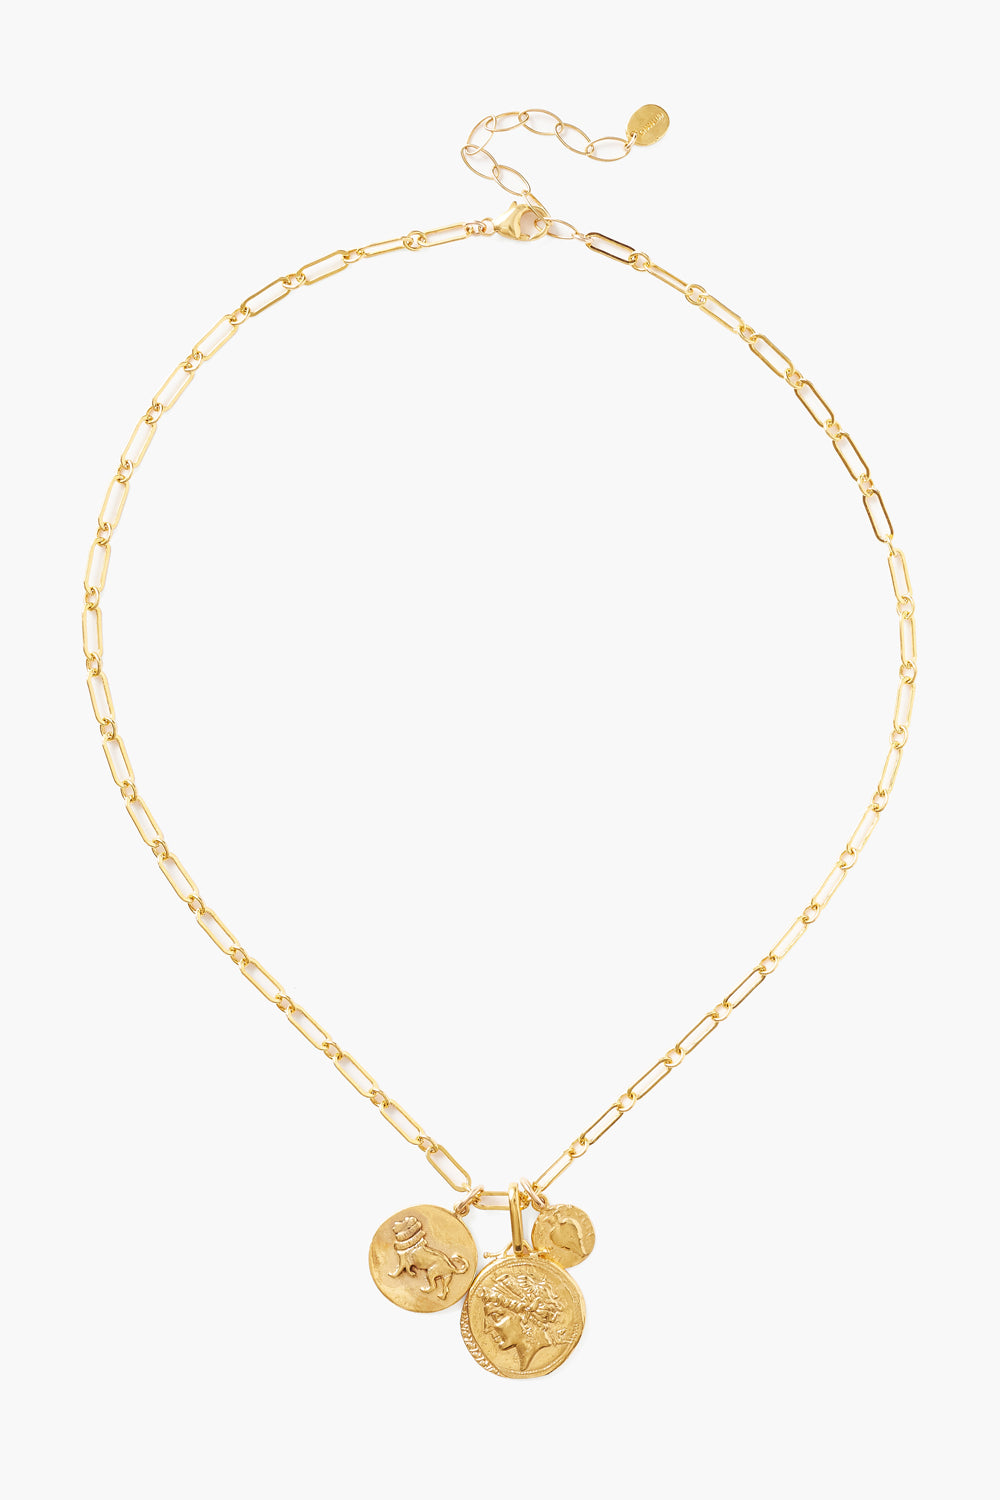 YELLOW GOLD ADJUSTABLE COIN PENDANT NECKLACE - Kingfisher Road - Online Boutique